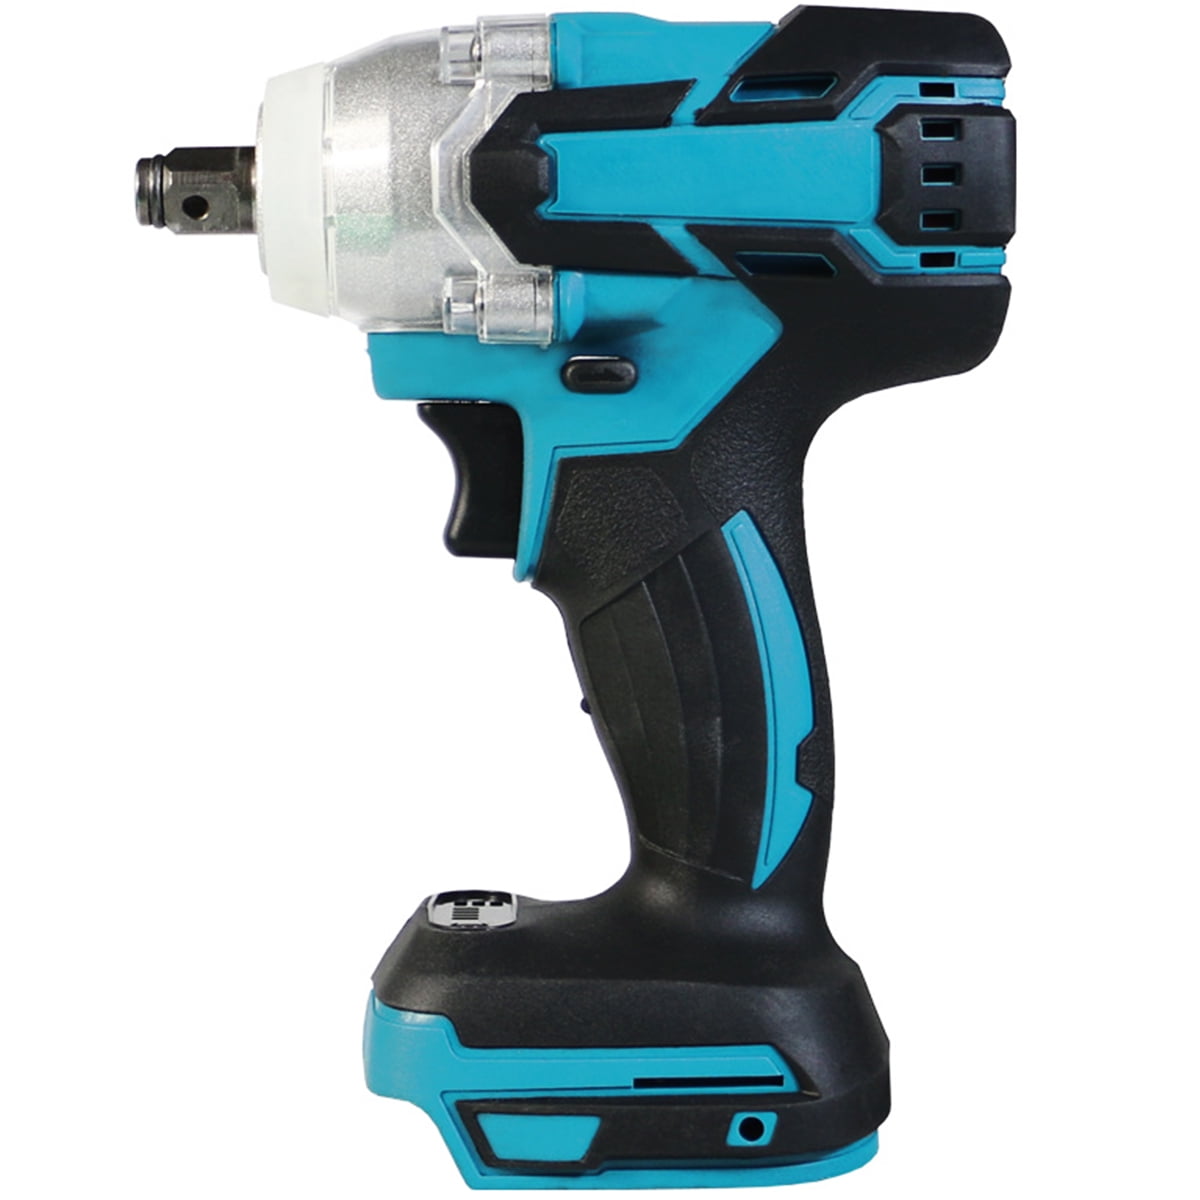 Brushless Electric Impact Wrench Cordless Impact Wrench High-Torque Impact Driver LED Light Compatible 18V Makita Powerful Wrench Tool for Car Repair Wood Metal - Walmart.com